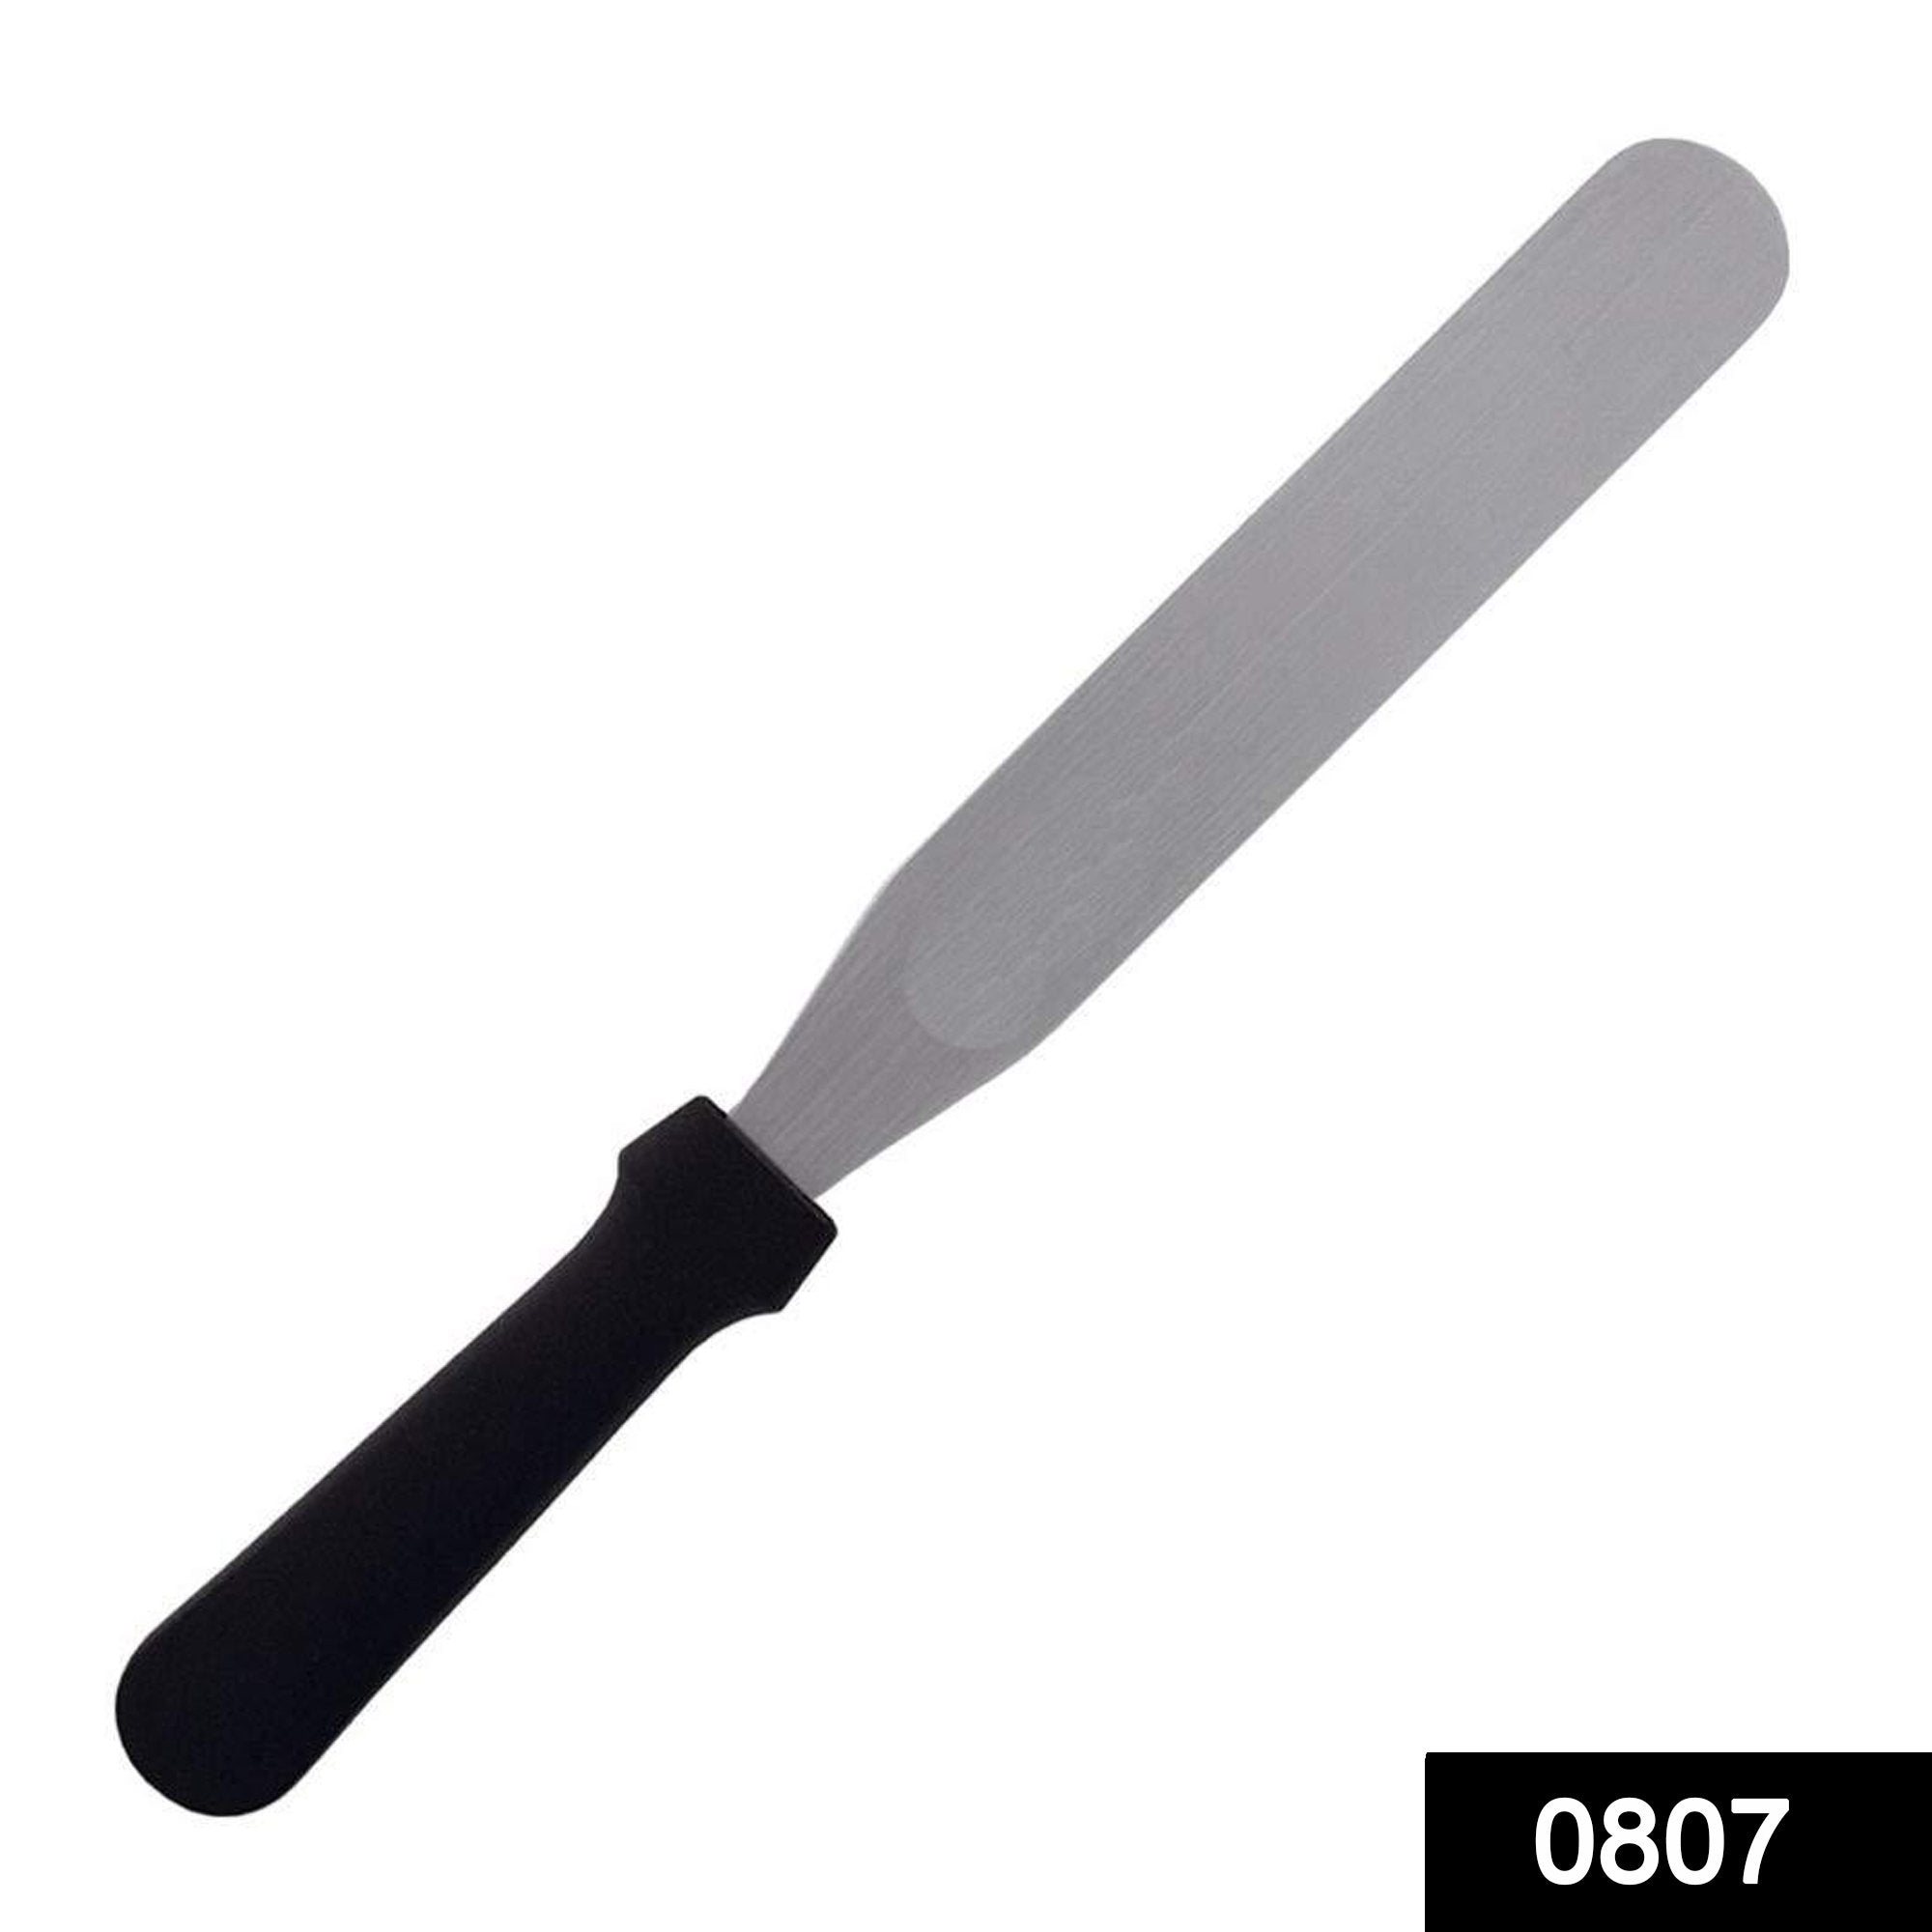 0807 Stainless Steel Palette Knife Offset Spatula for Spreading and Smoothing Icing Frosting of Cake 16 Inch - SkyShopy